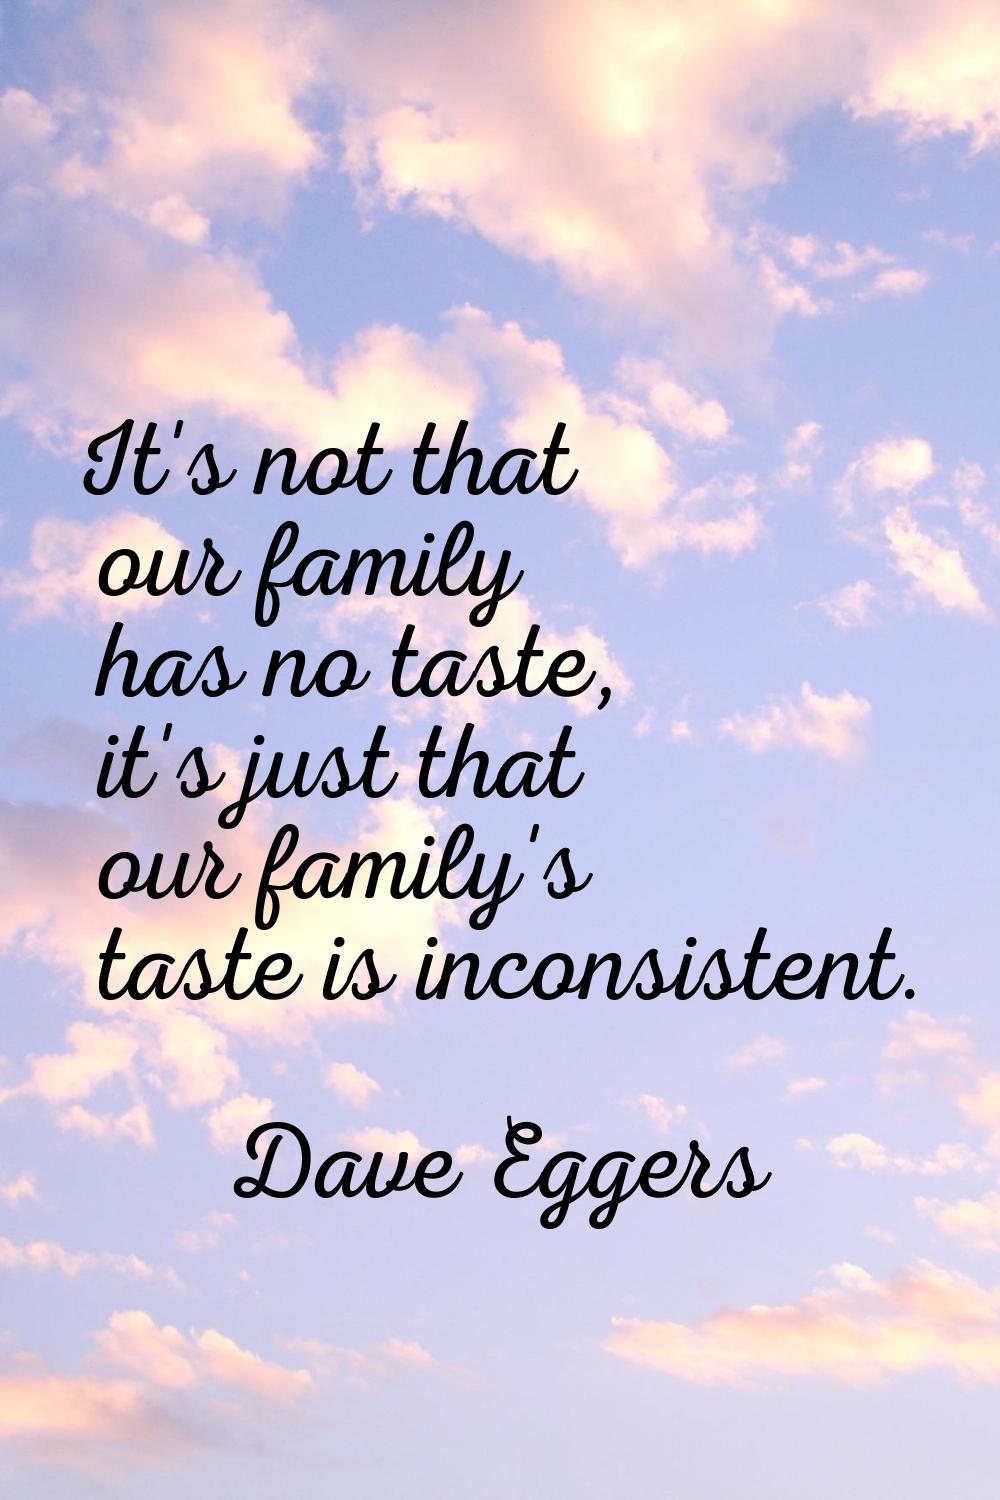 It's not that our family has no taste, it's just that our family's taste is inconsistent.